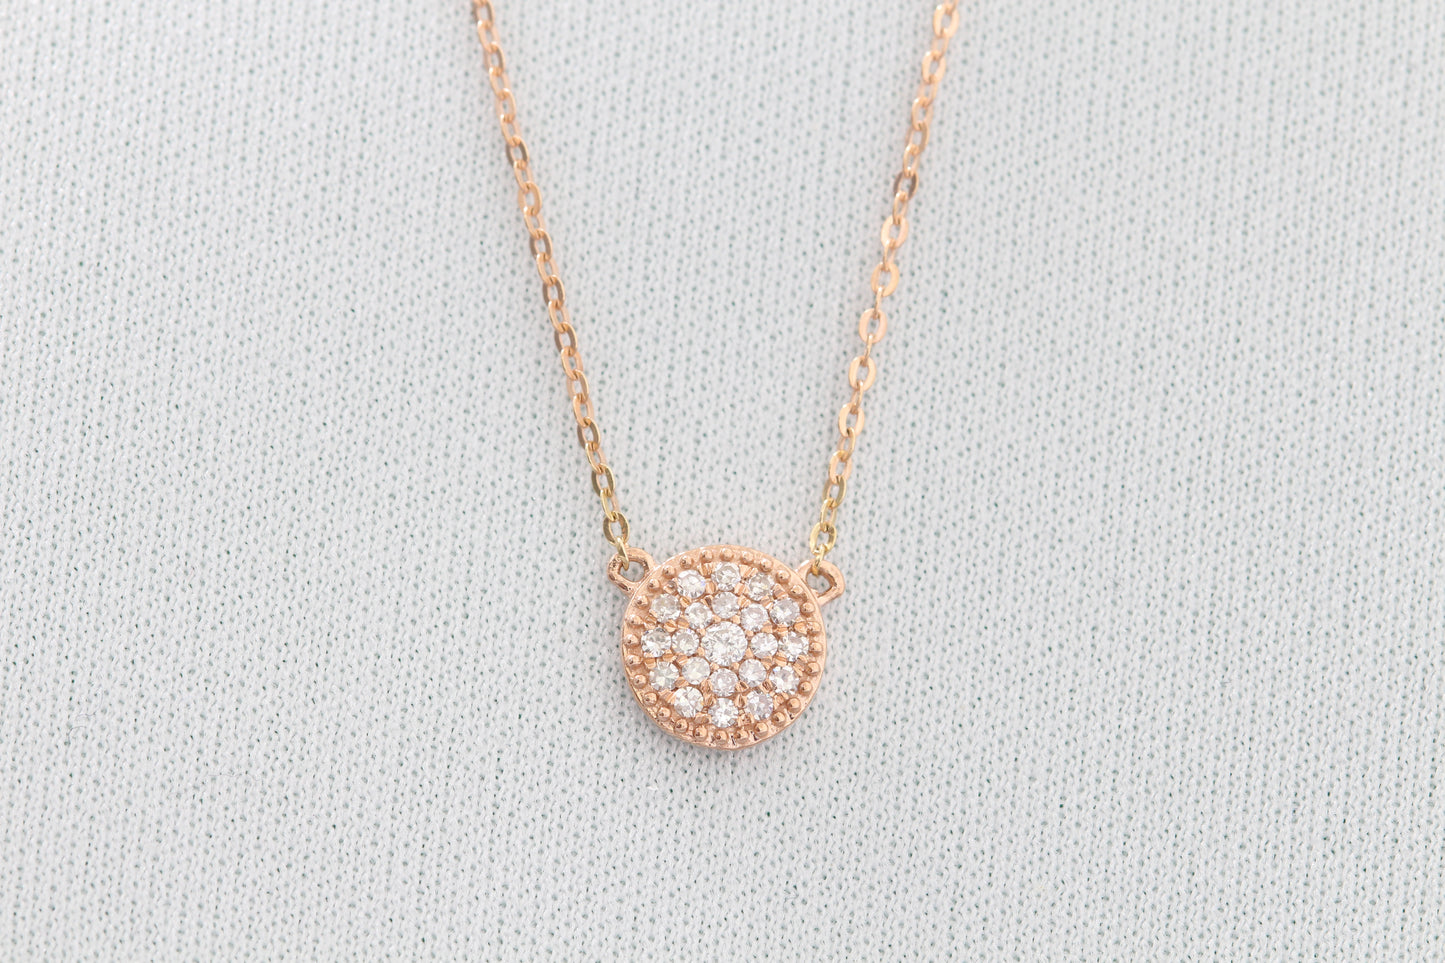 10k diamond necklace yellow or rose gold